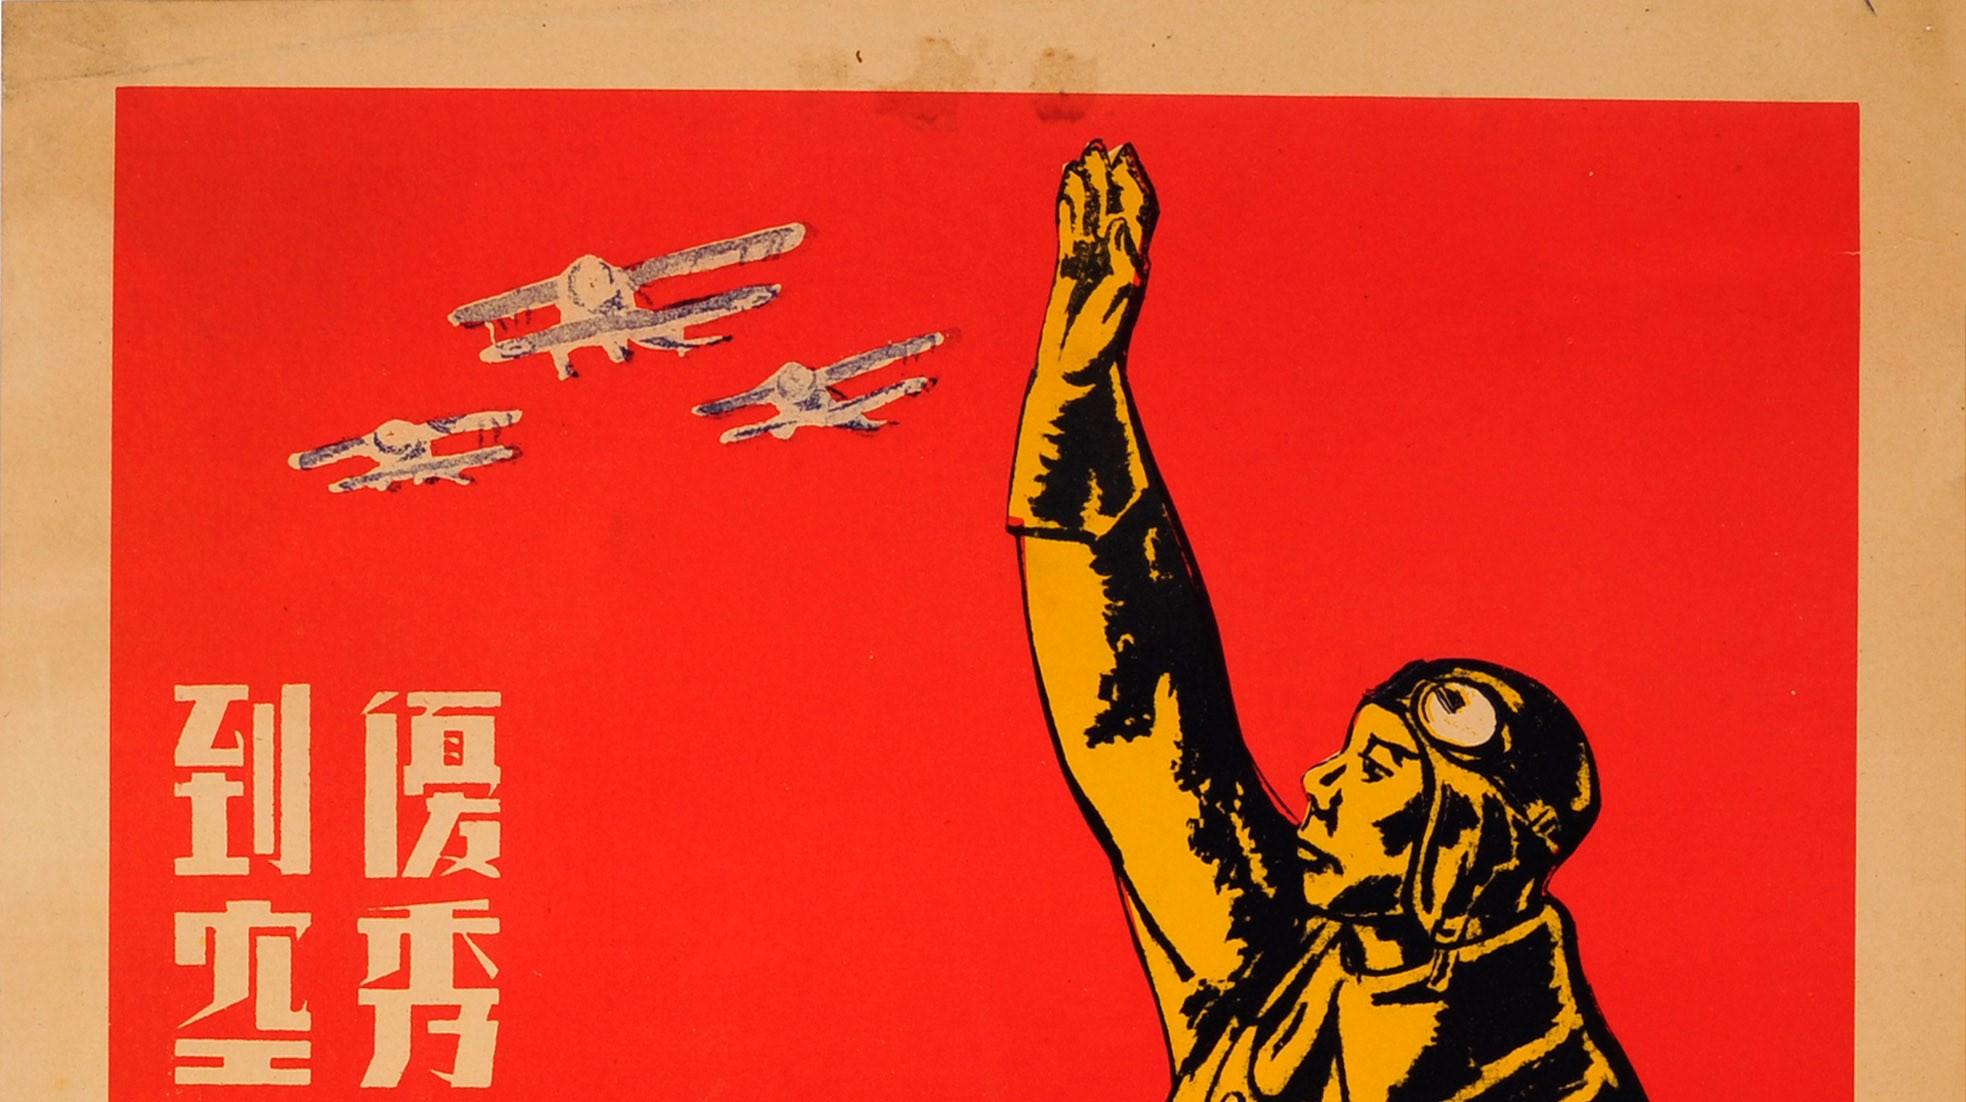 Original vintage World War Two propaganda poster promoting the Chinese air force - outstanding youths, join the air force! Printed by the board of political training, military affairs commission. The design features a great illustration of a Chinese